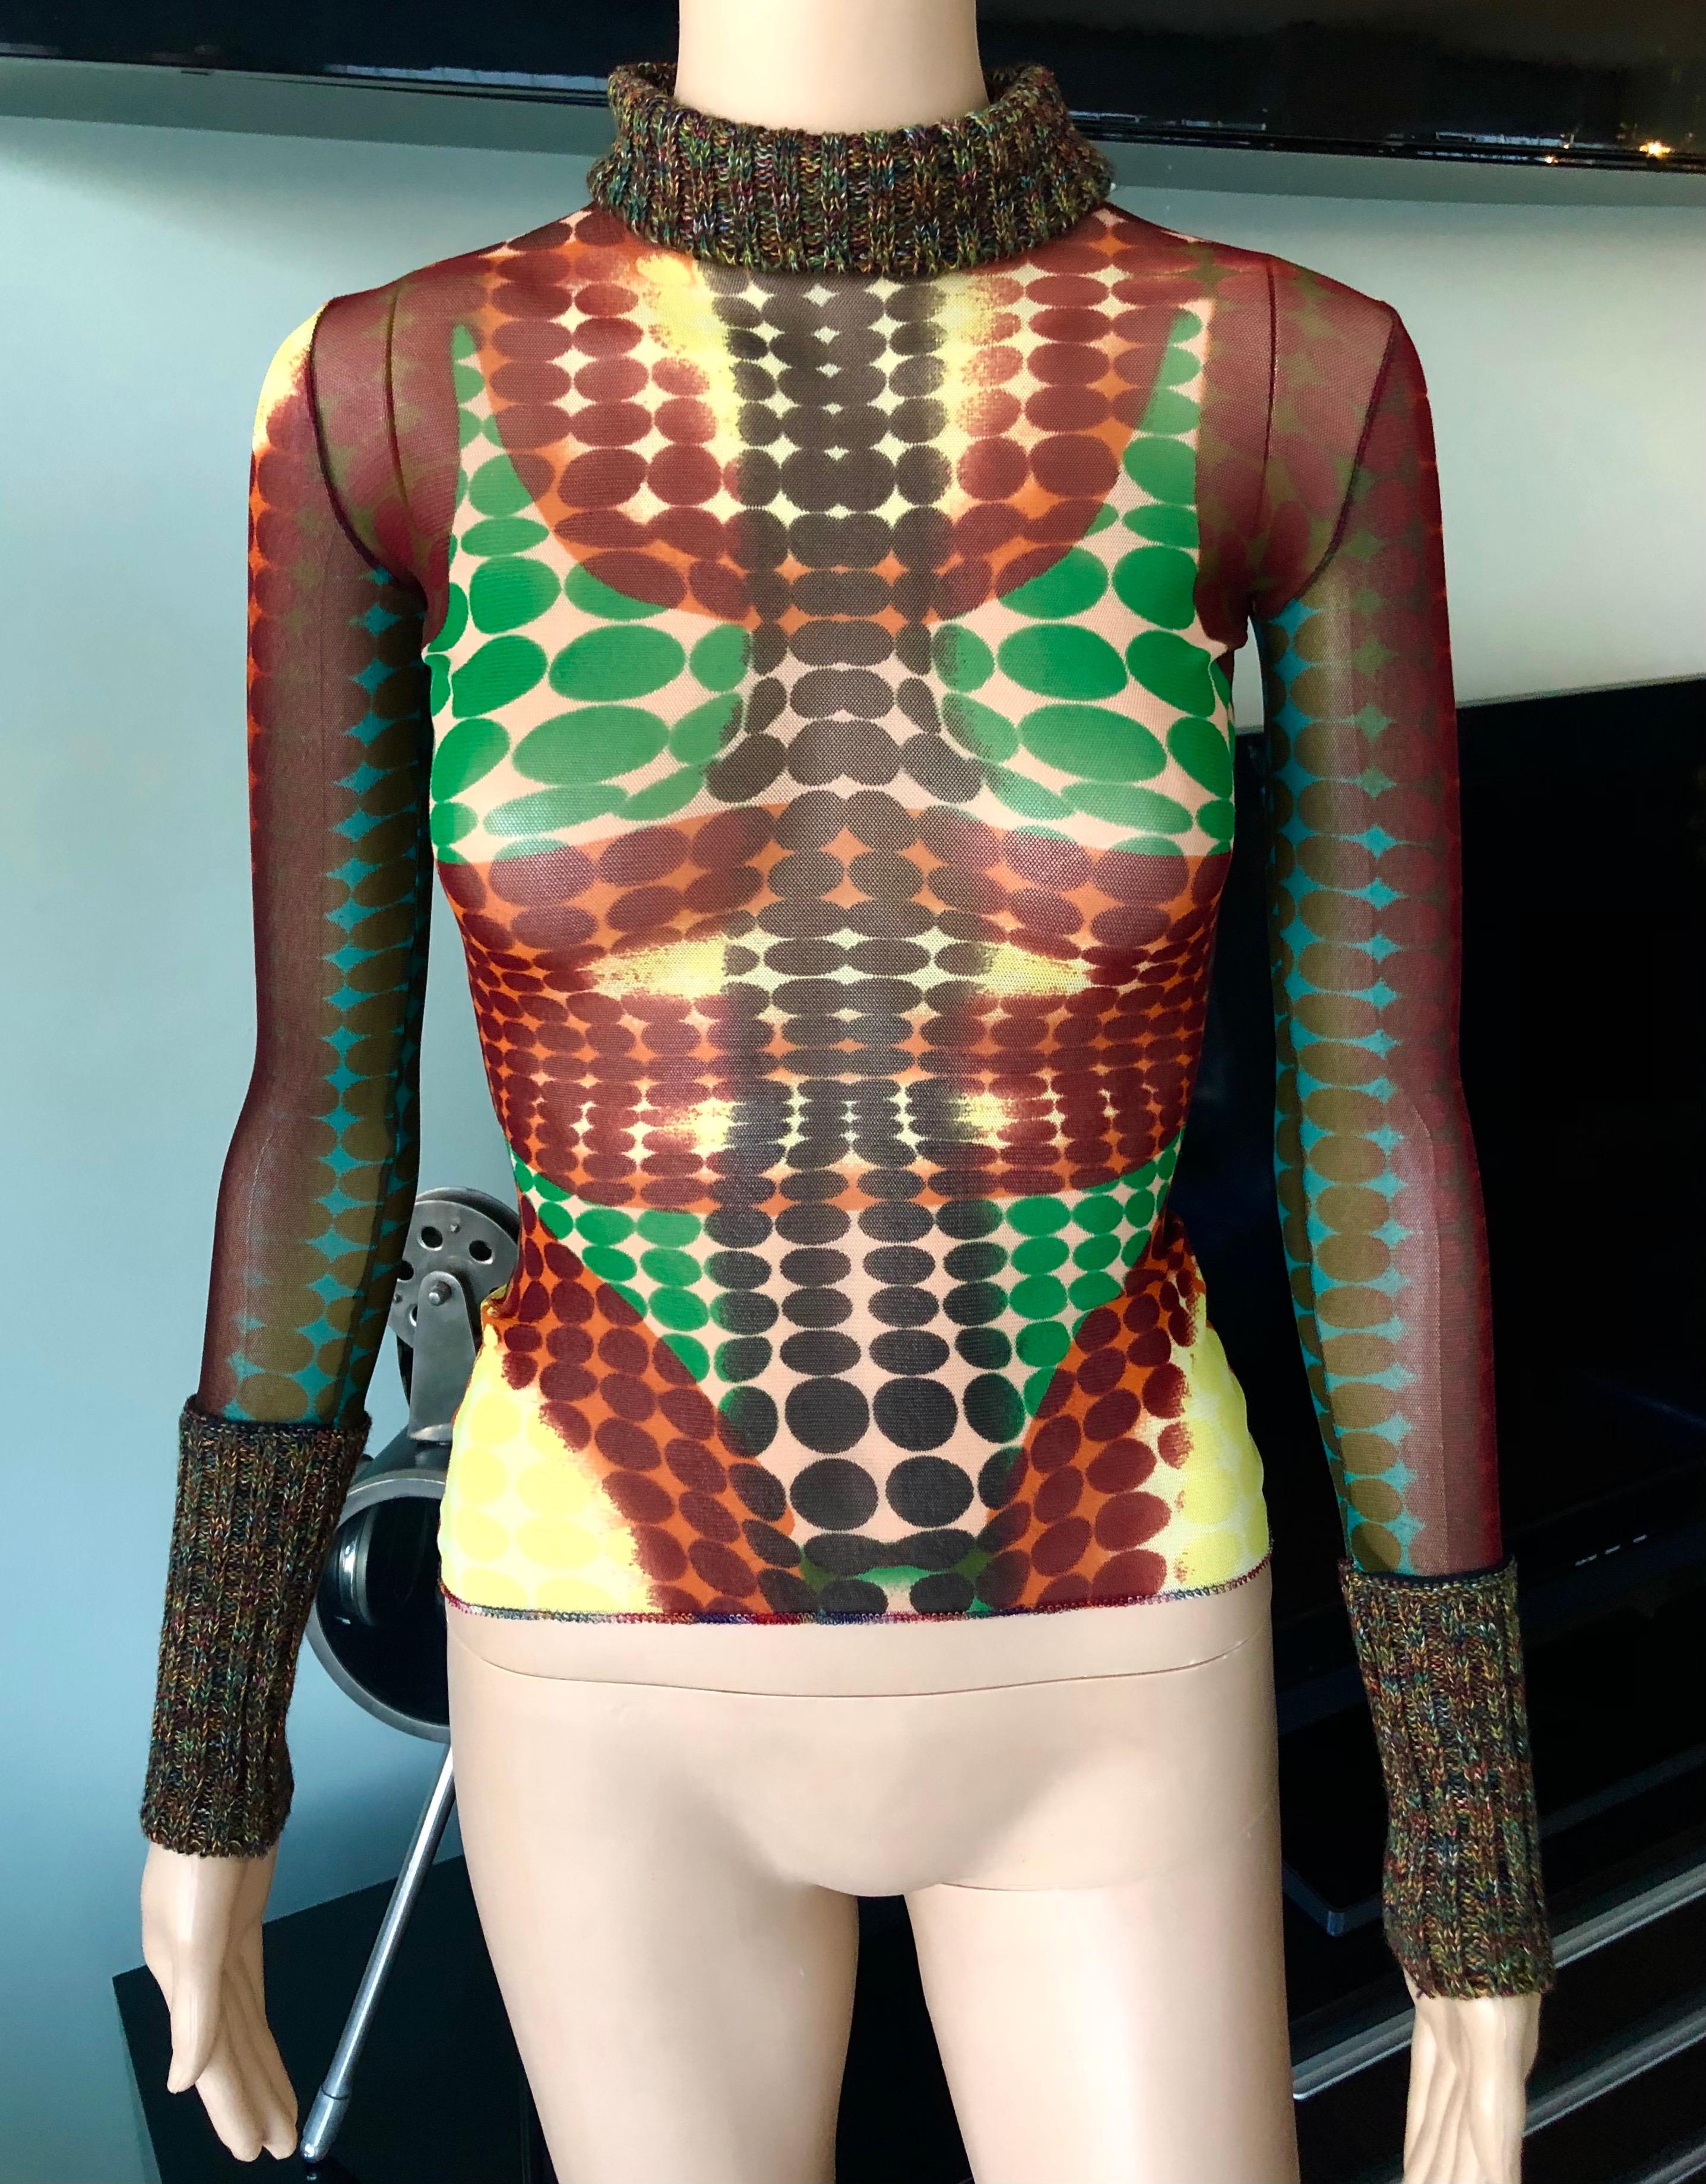 Brown Jean Paul Gaultier F/W 1995 Runway Iconic Cyber Dots Sheer Top  For Sale